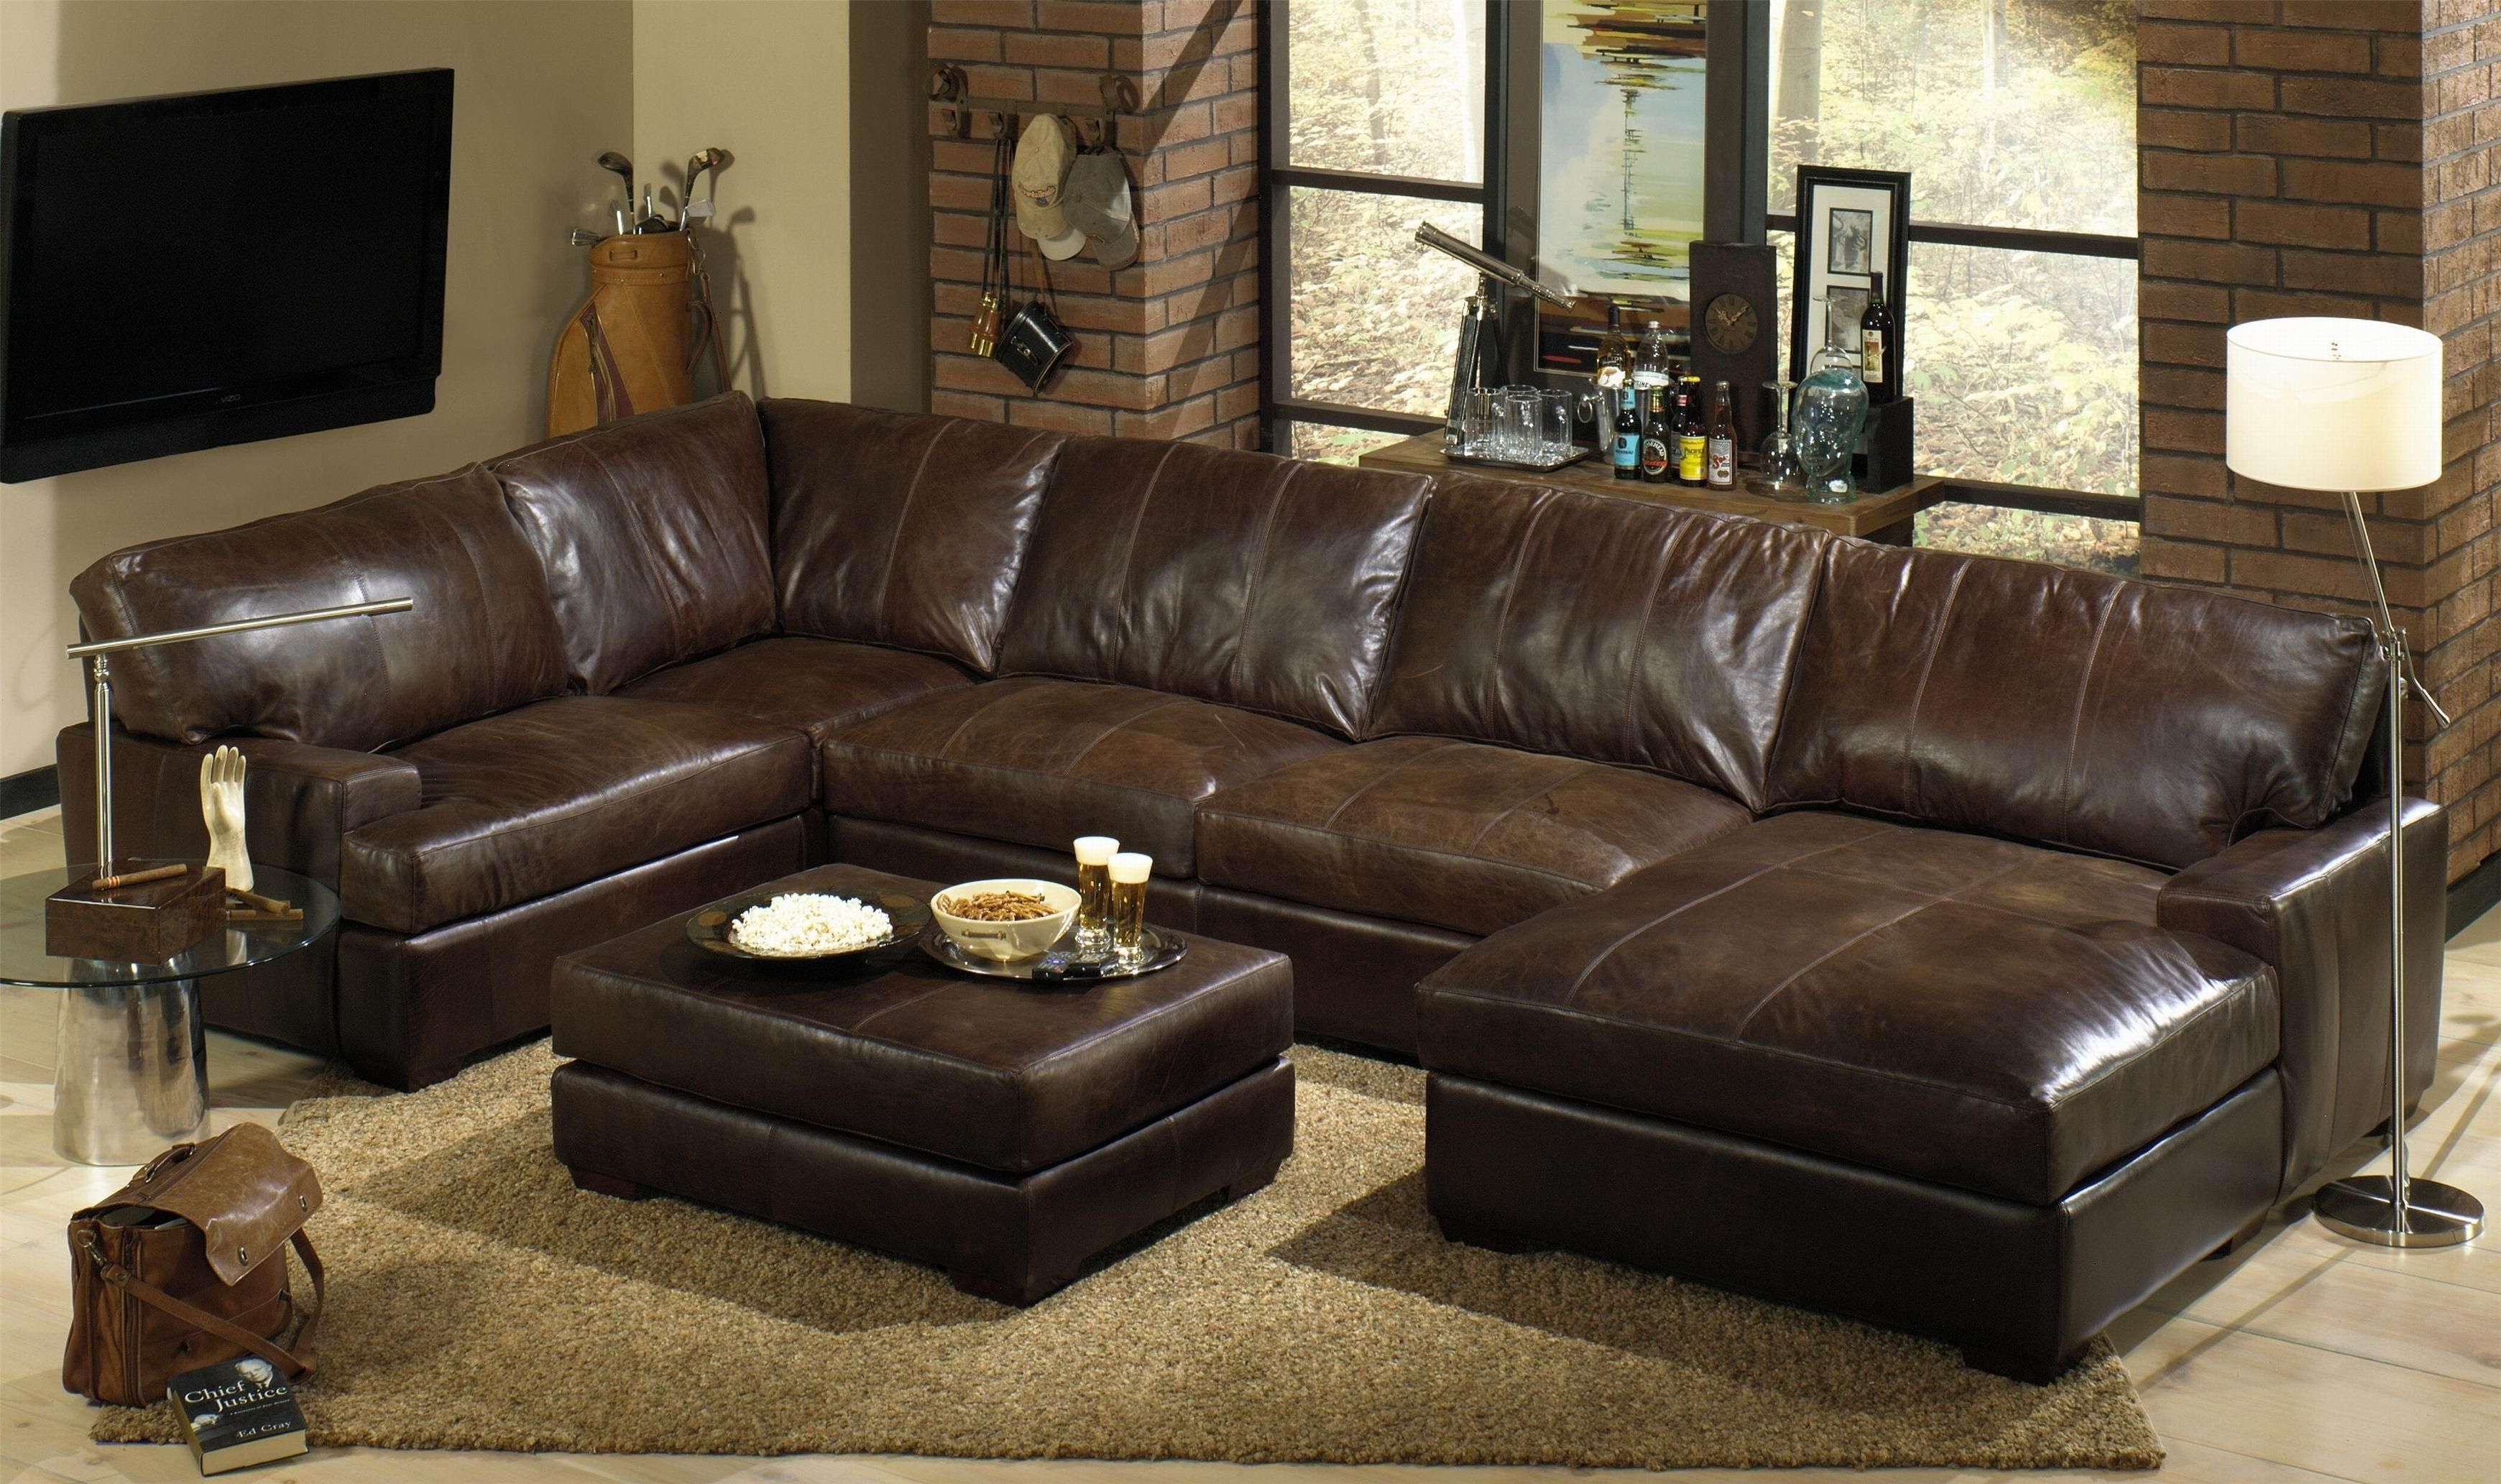 Top Leather Motion Sectional Sofa Ideas Caruso Piece Power Chaise 2 Pertaining To Leather Motion Sectional Sofas (View 9 of 10)